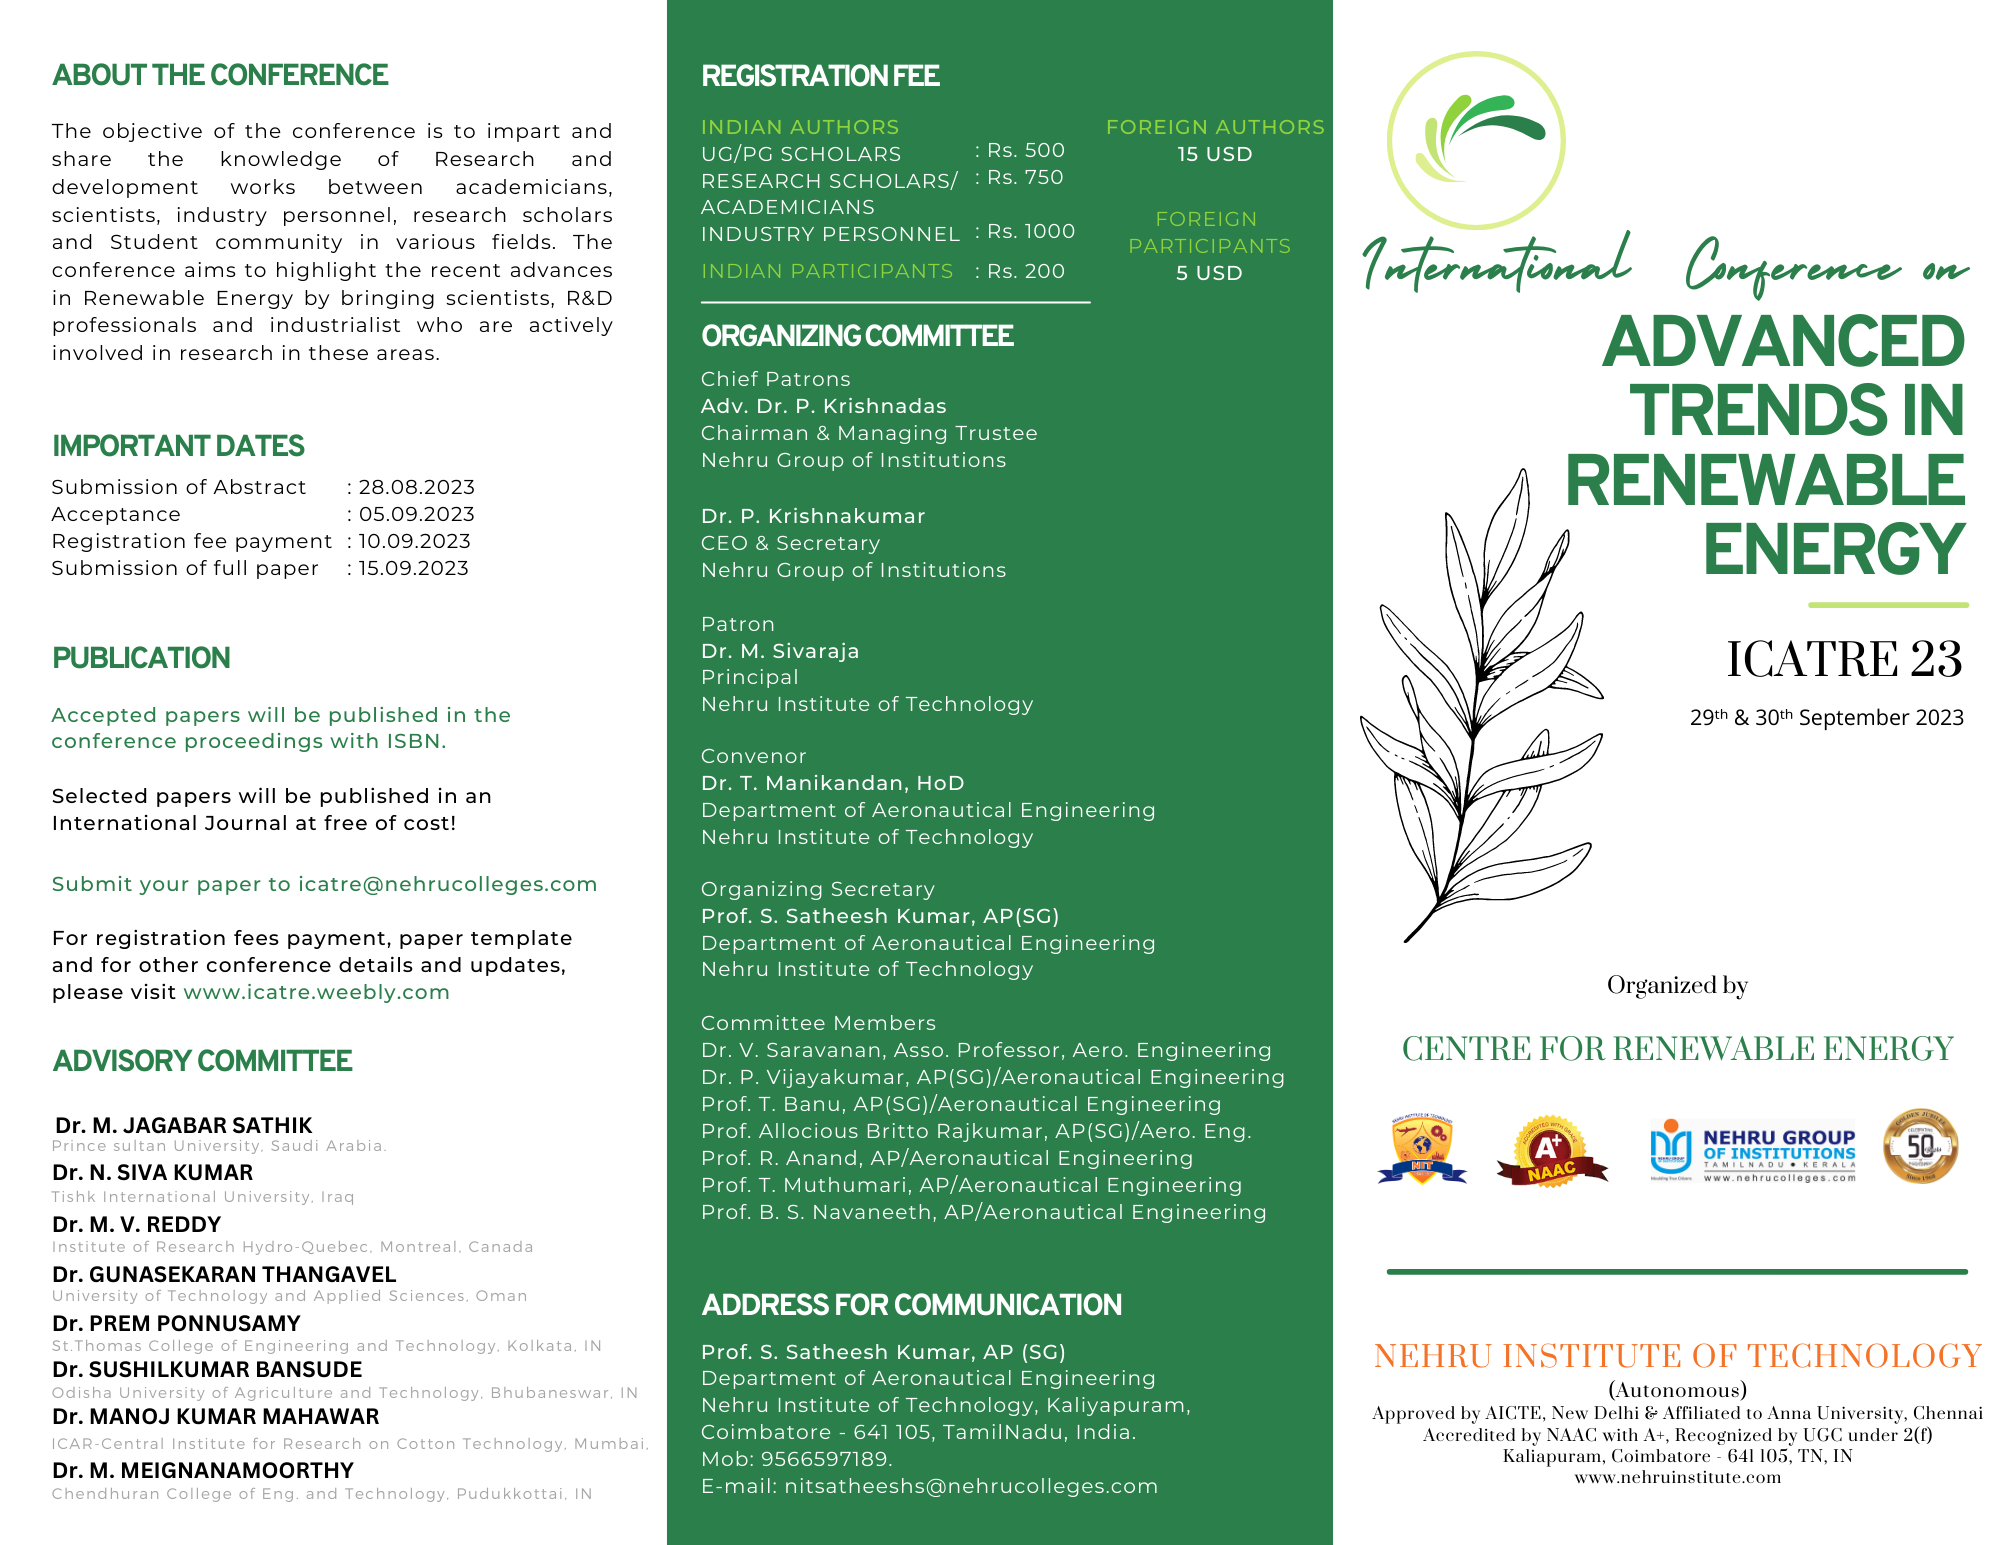 International Conference on Advanced Trends in Renewable Energy (ICATRE 23)